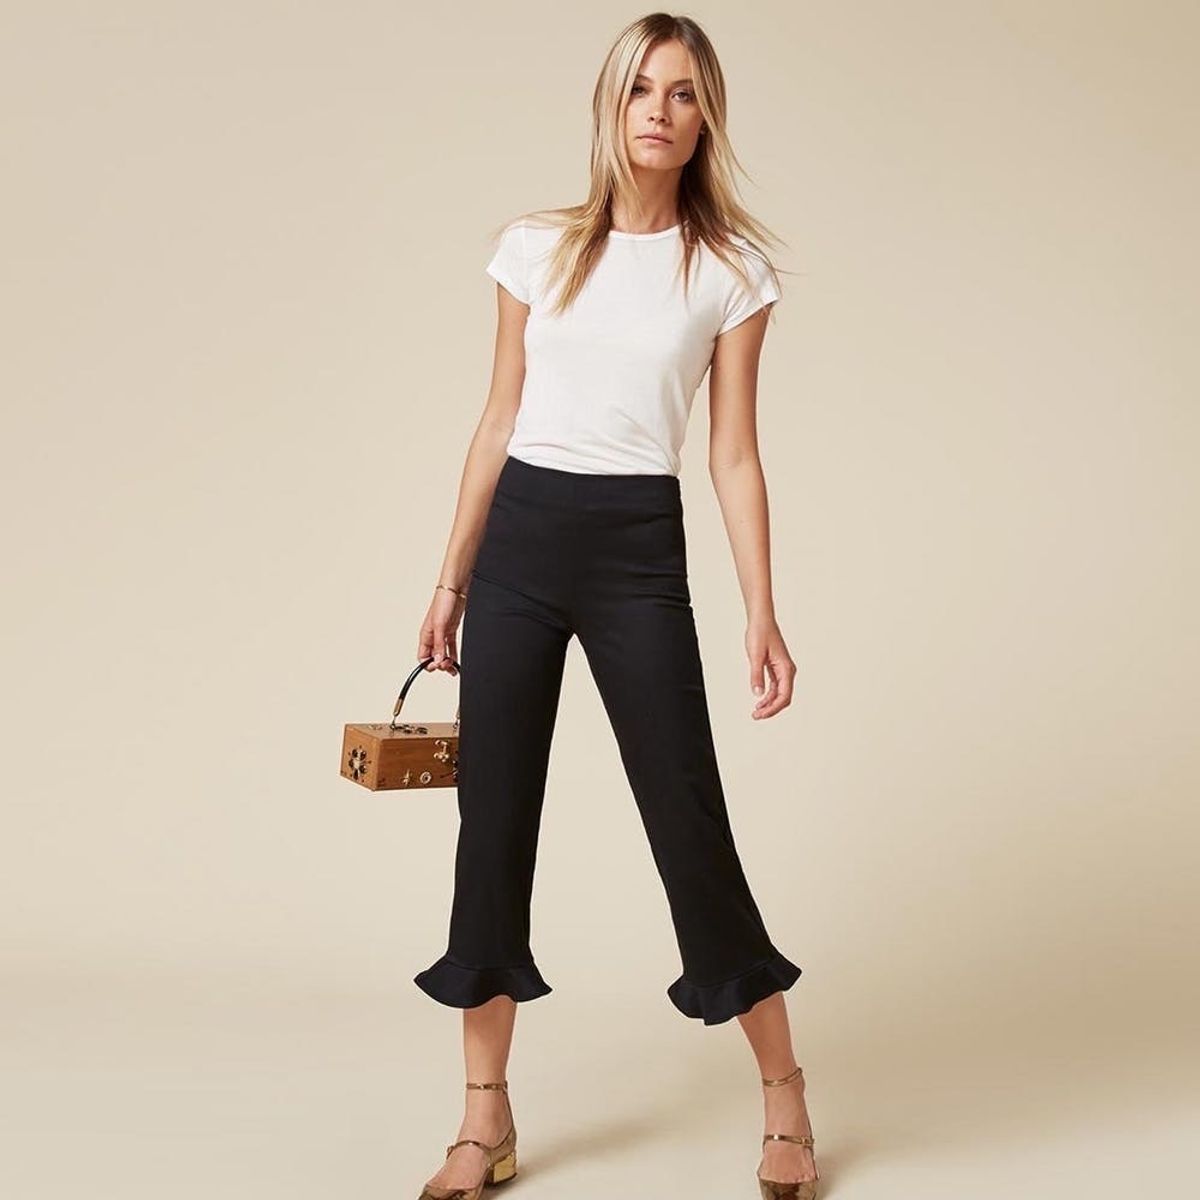 15 Pairs of Frilly Hem Trousers Lazy Girls Will LOVE